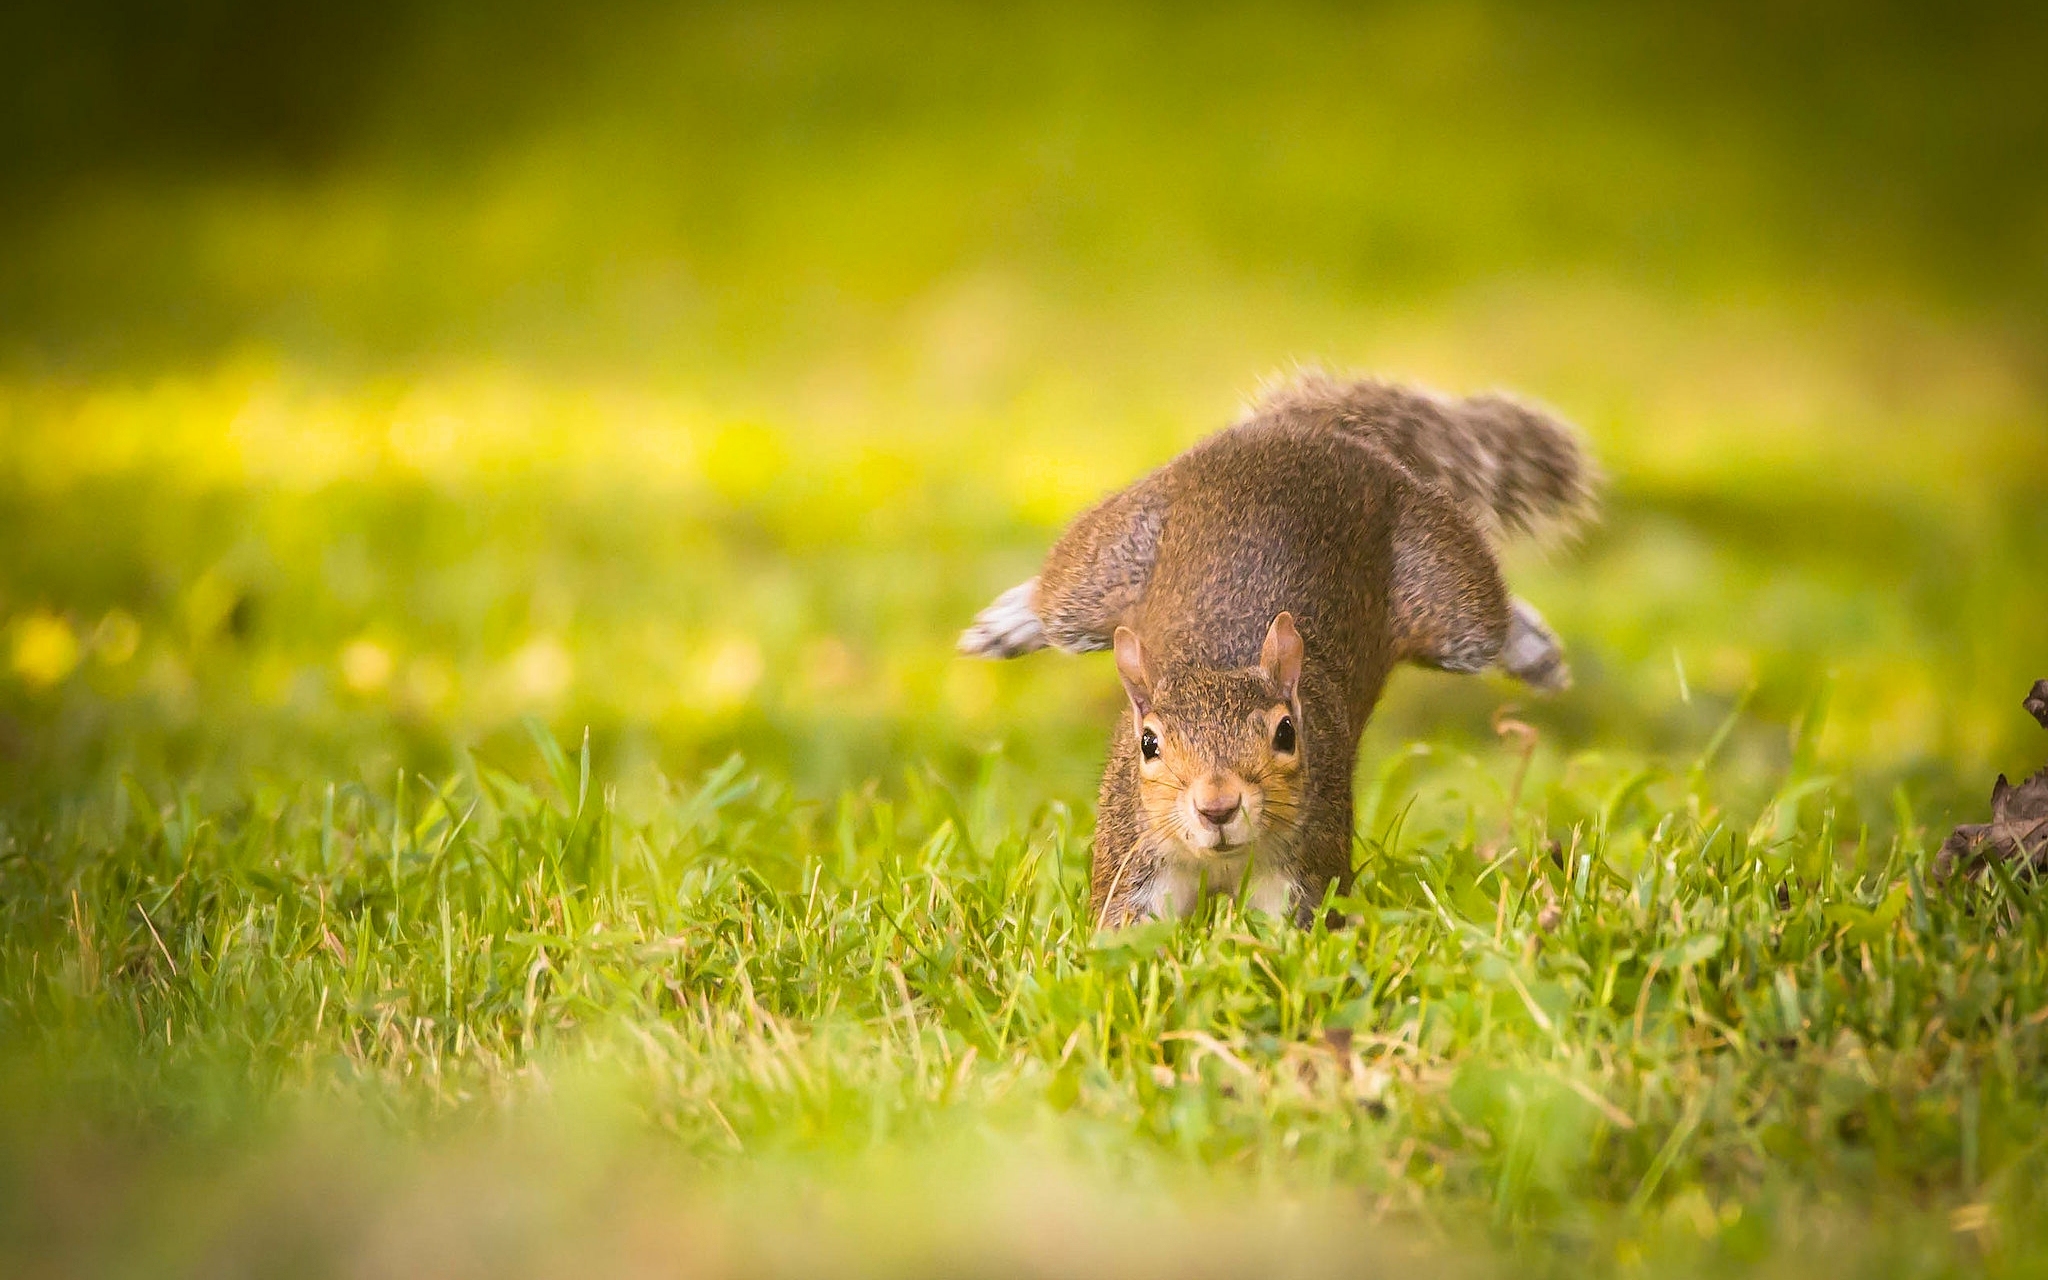 HD desktop wallpaper: Funny, Squirrel, Grass, Blur, Animal, Rodent, Sunny  download free picture #784252